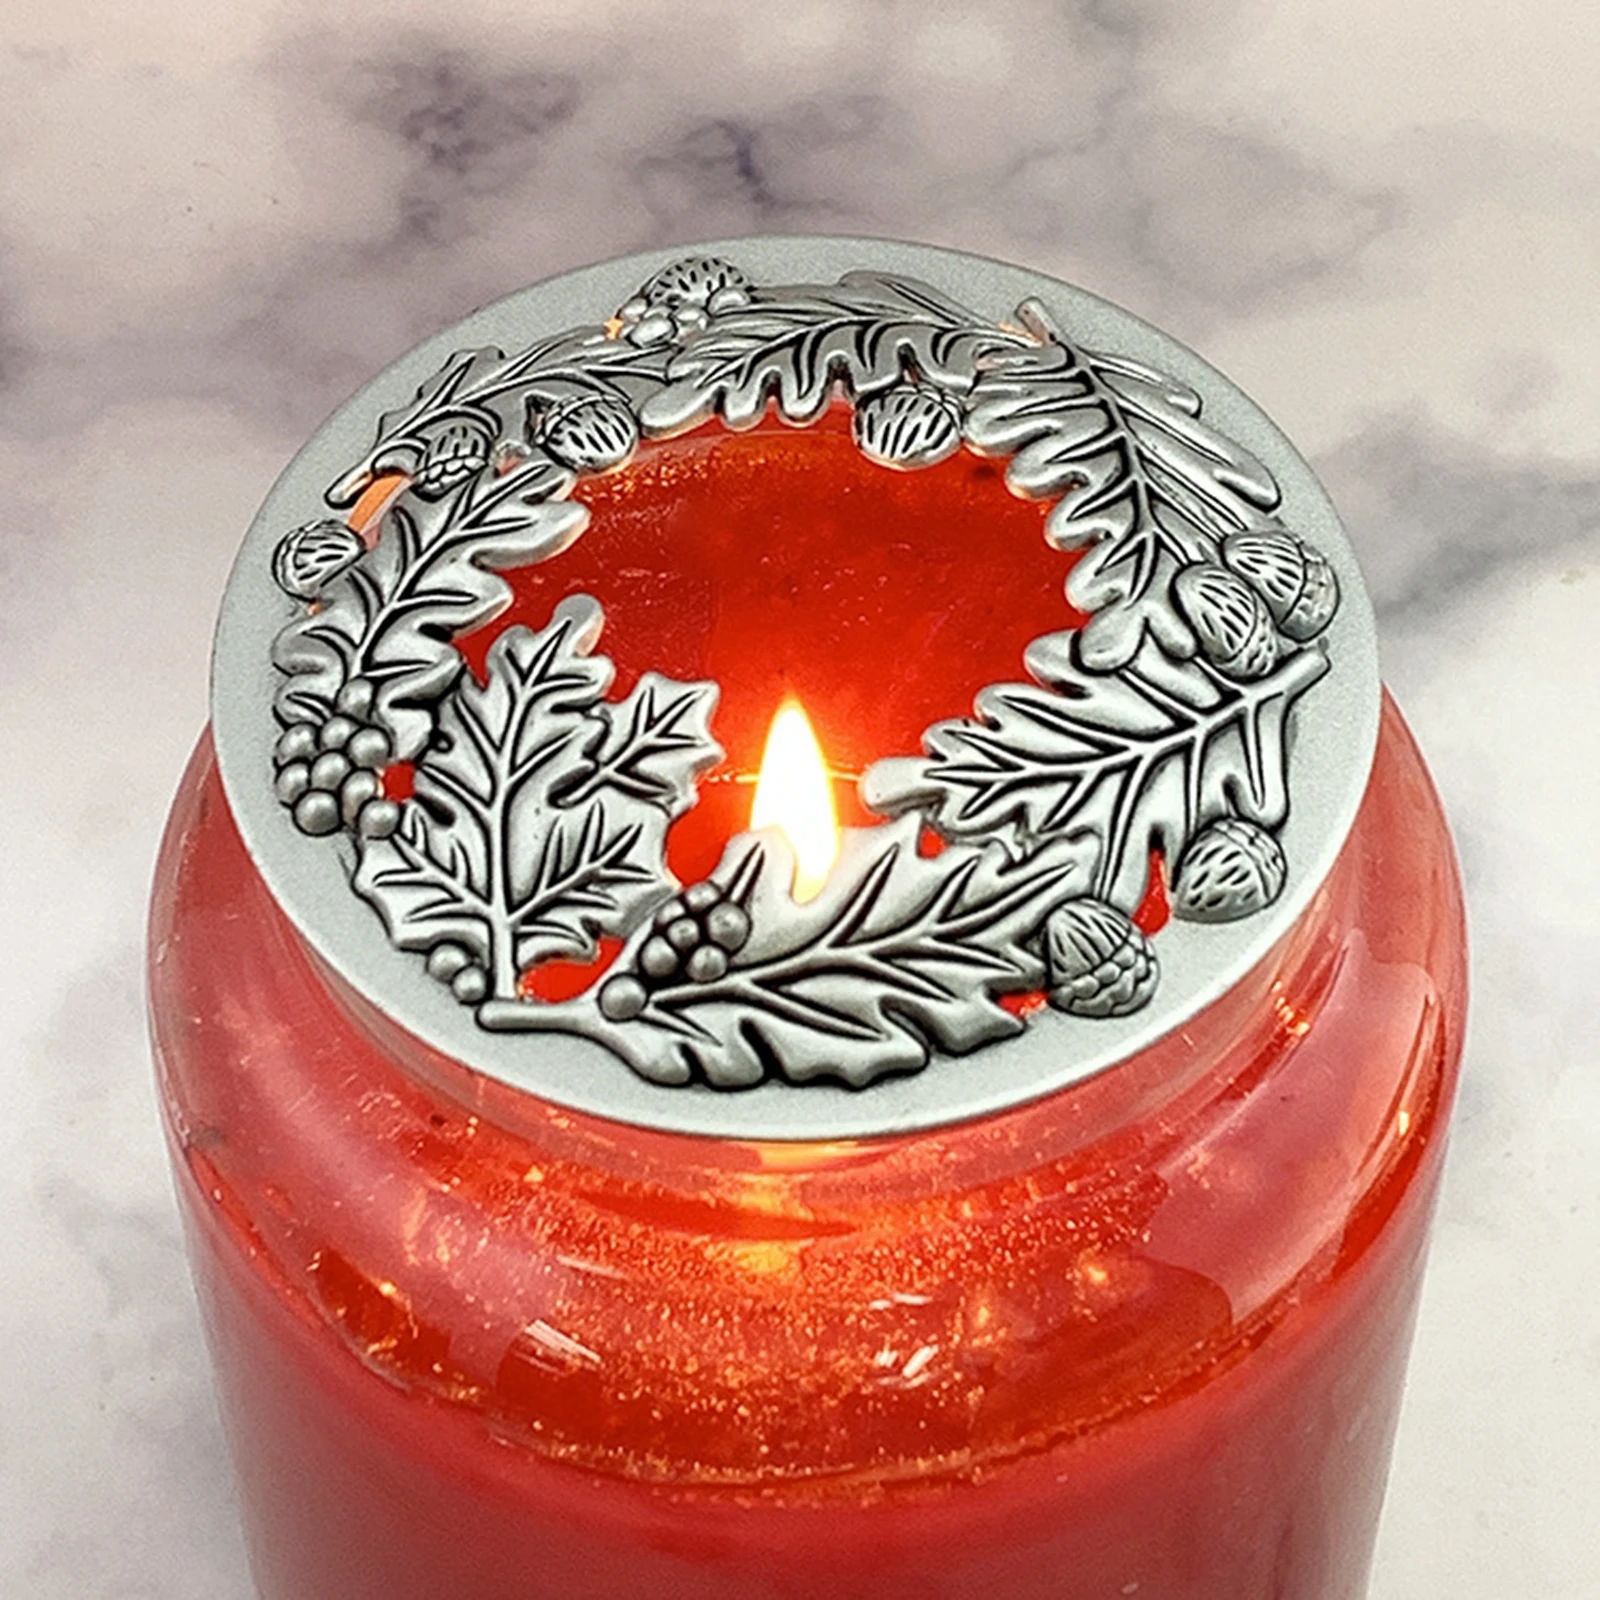 Jar Candle Topper - Candle Toppers to Burn Evenly Home Decor Accessories Candles Shades Sleeves Cover Top Lid